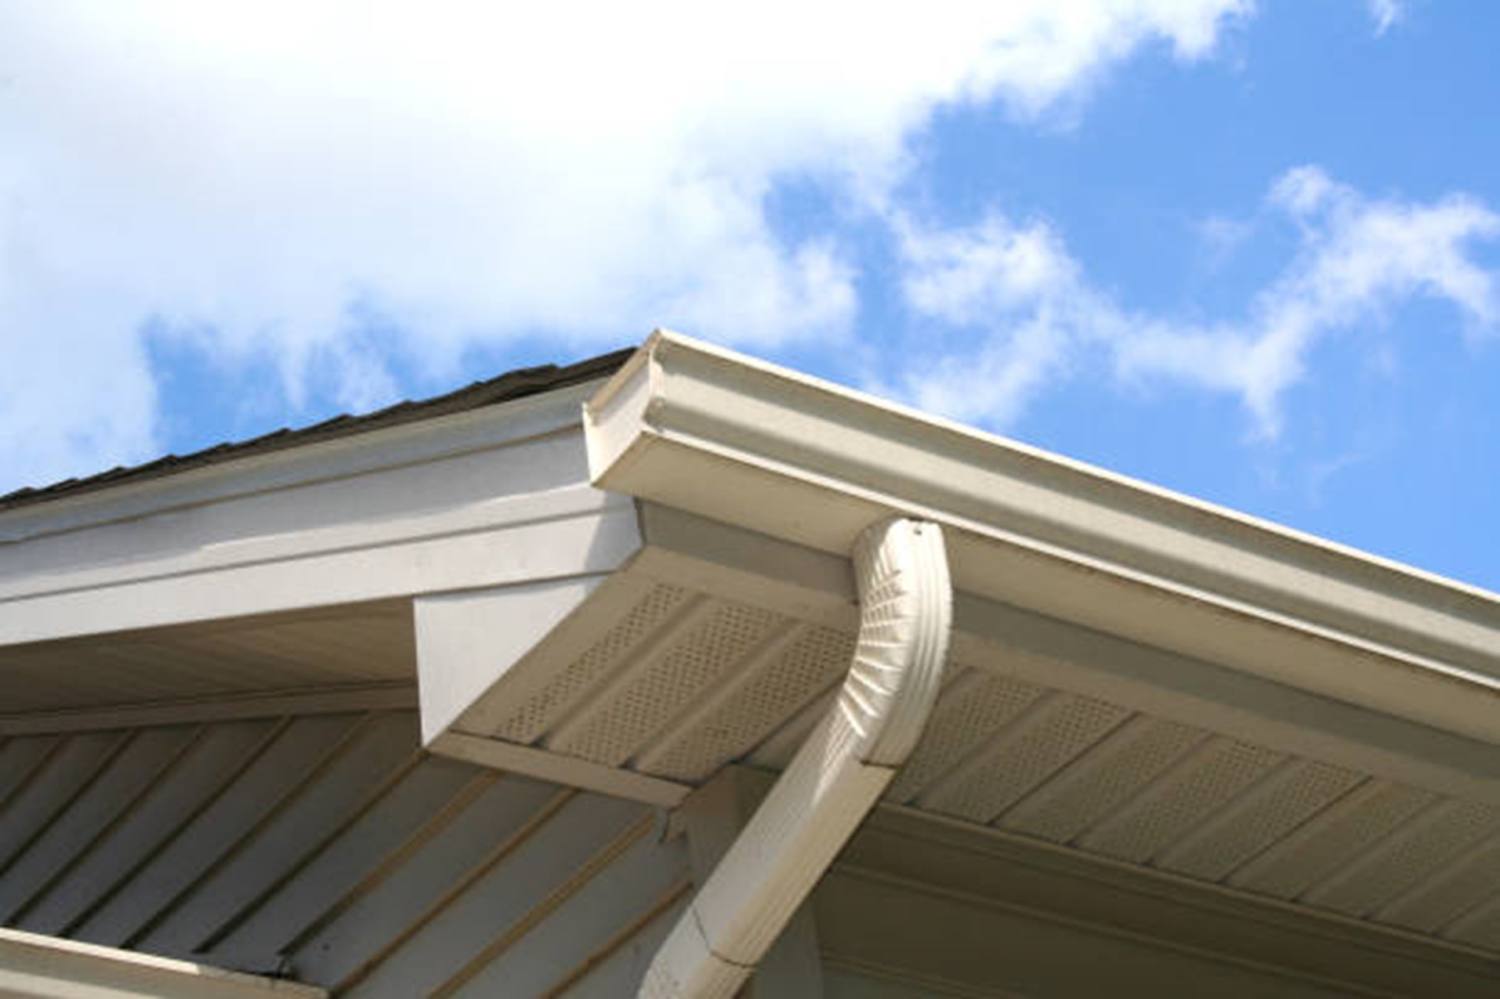 Eavestrough vs Gutter: What’s the Difference and Which is Better?